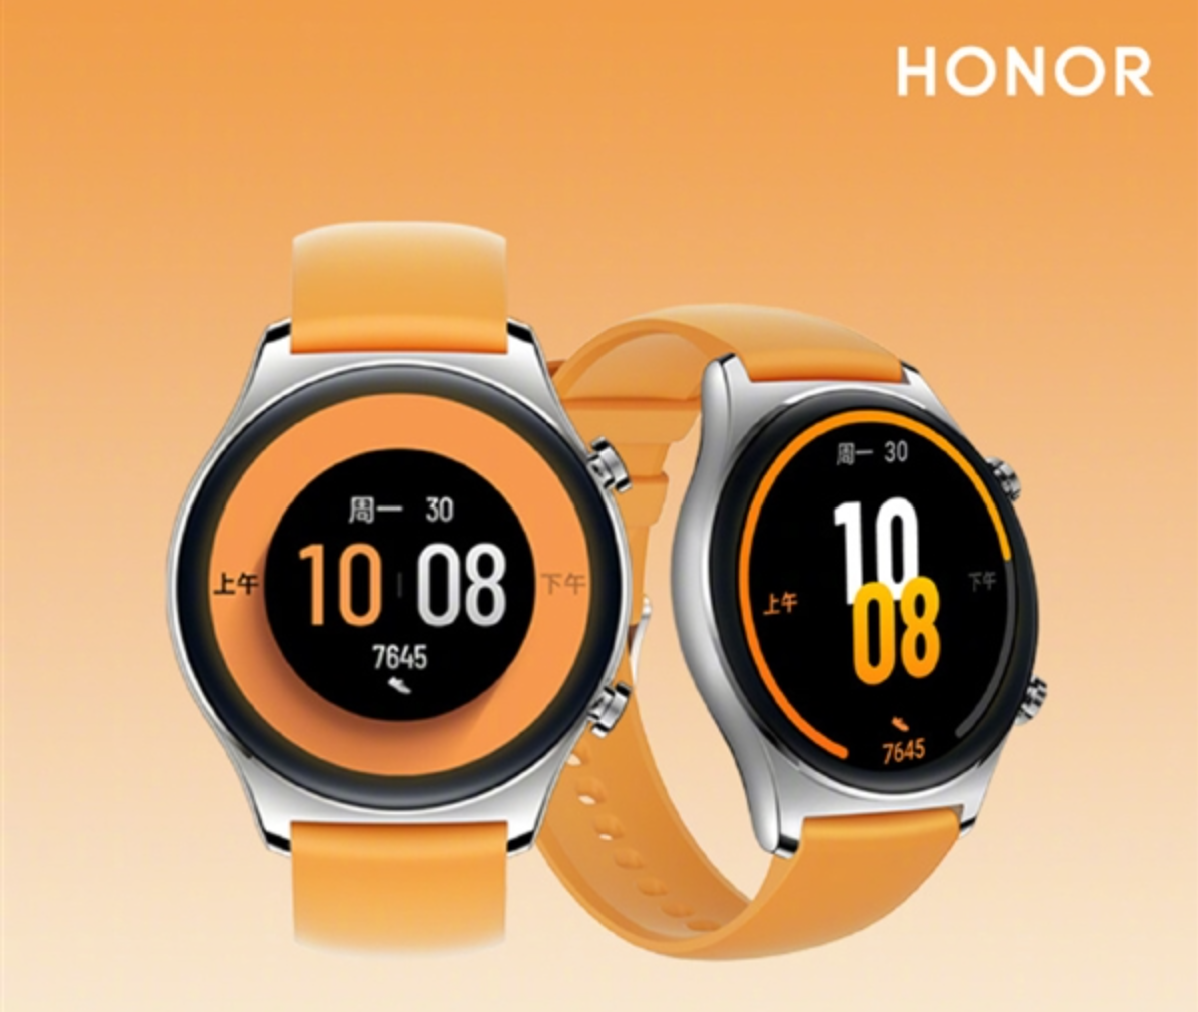 Honor Watch GS 3 smartwatch gets a new Summer Orange color variant -  Gizmochina